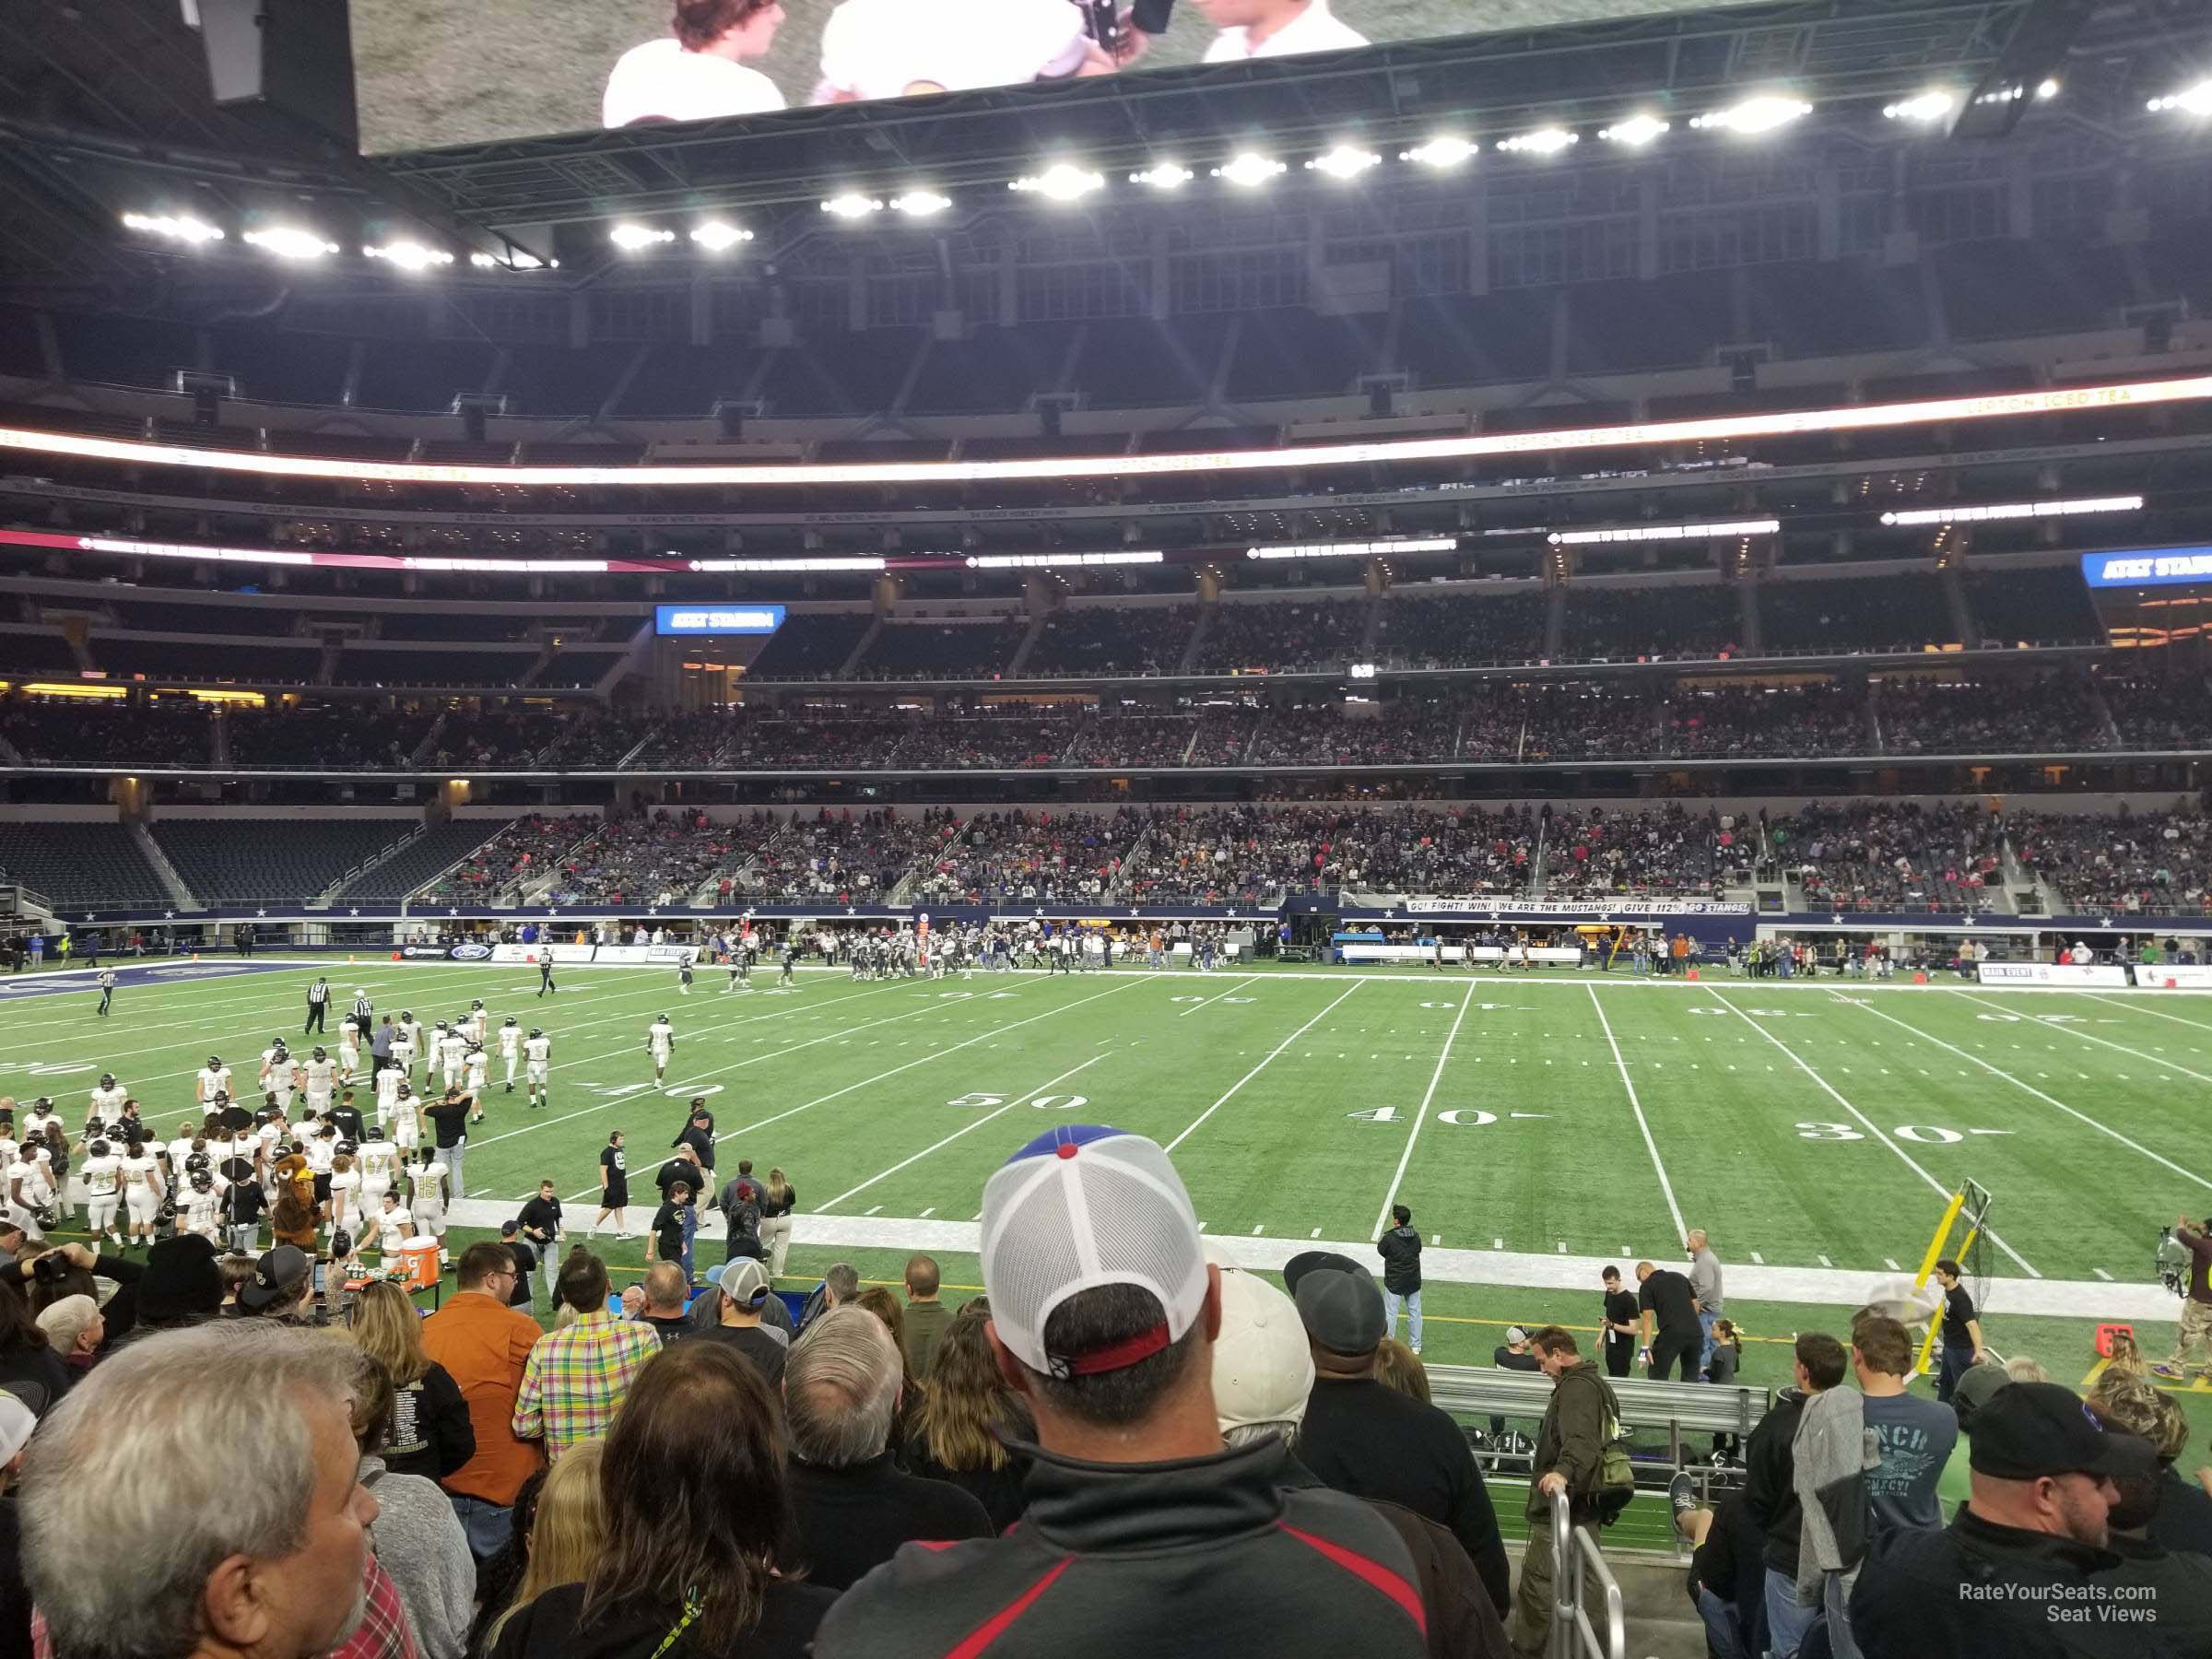 section c134, row 12 seat view  for football - at&t stadium (cowboys stadium)